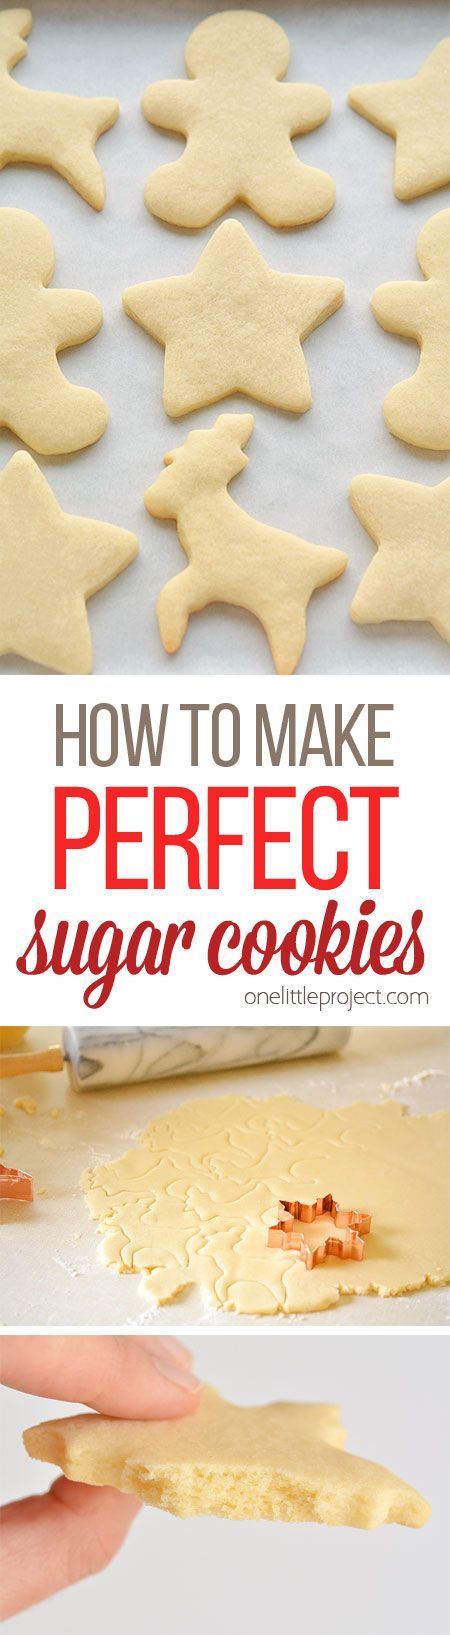 This recipe makes PERFECT sugar cookies! Theyre delicious both with and witho